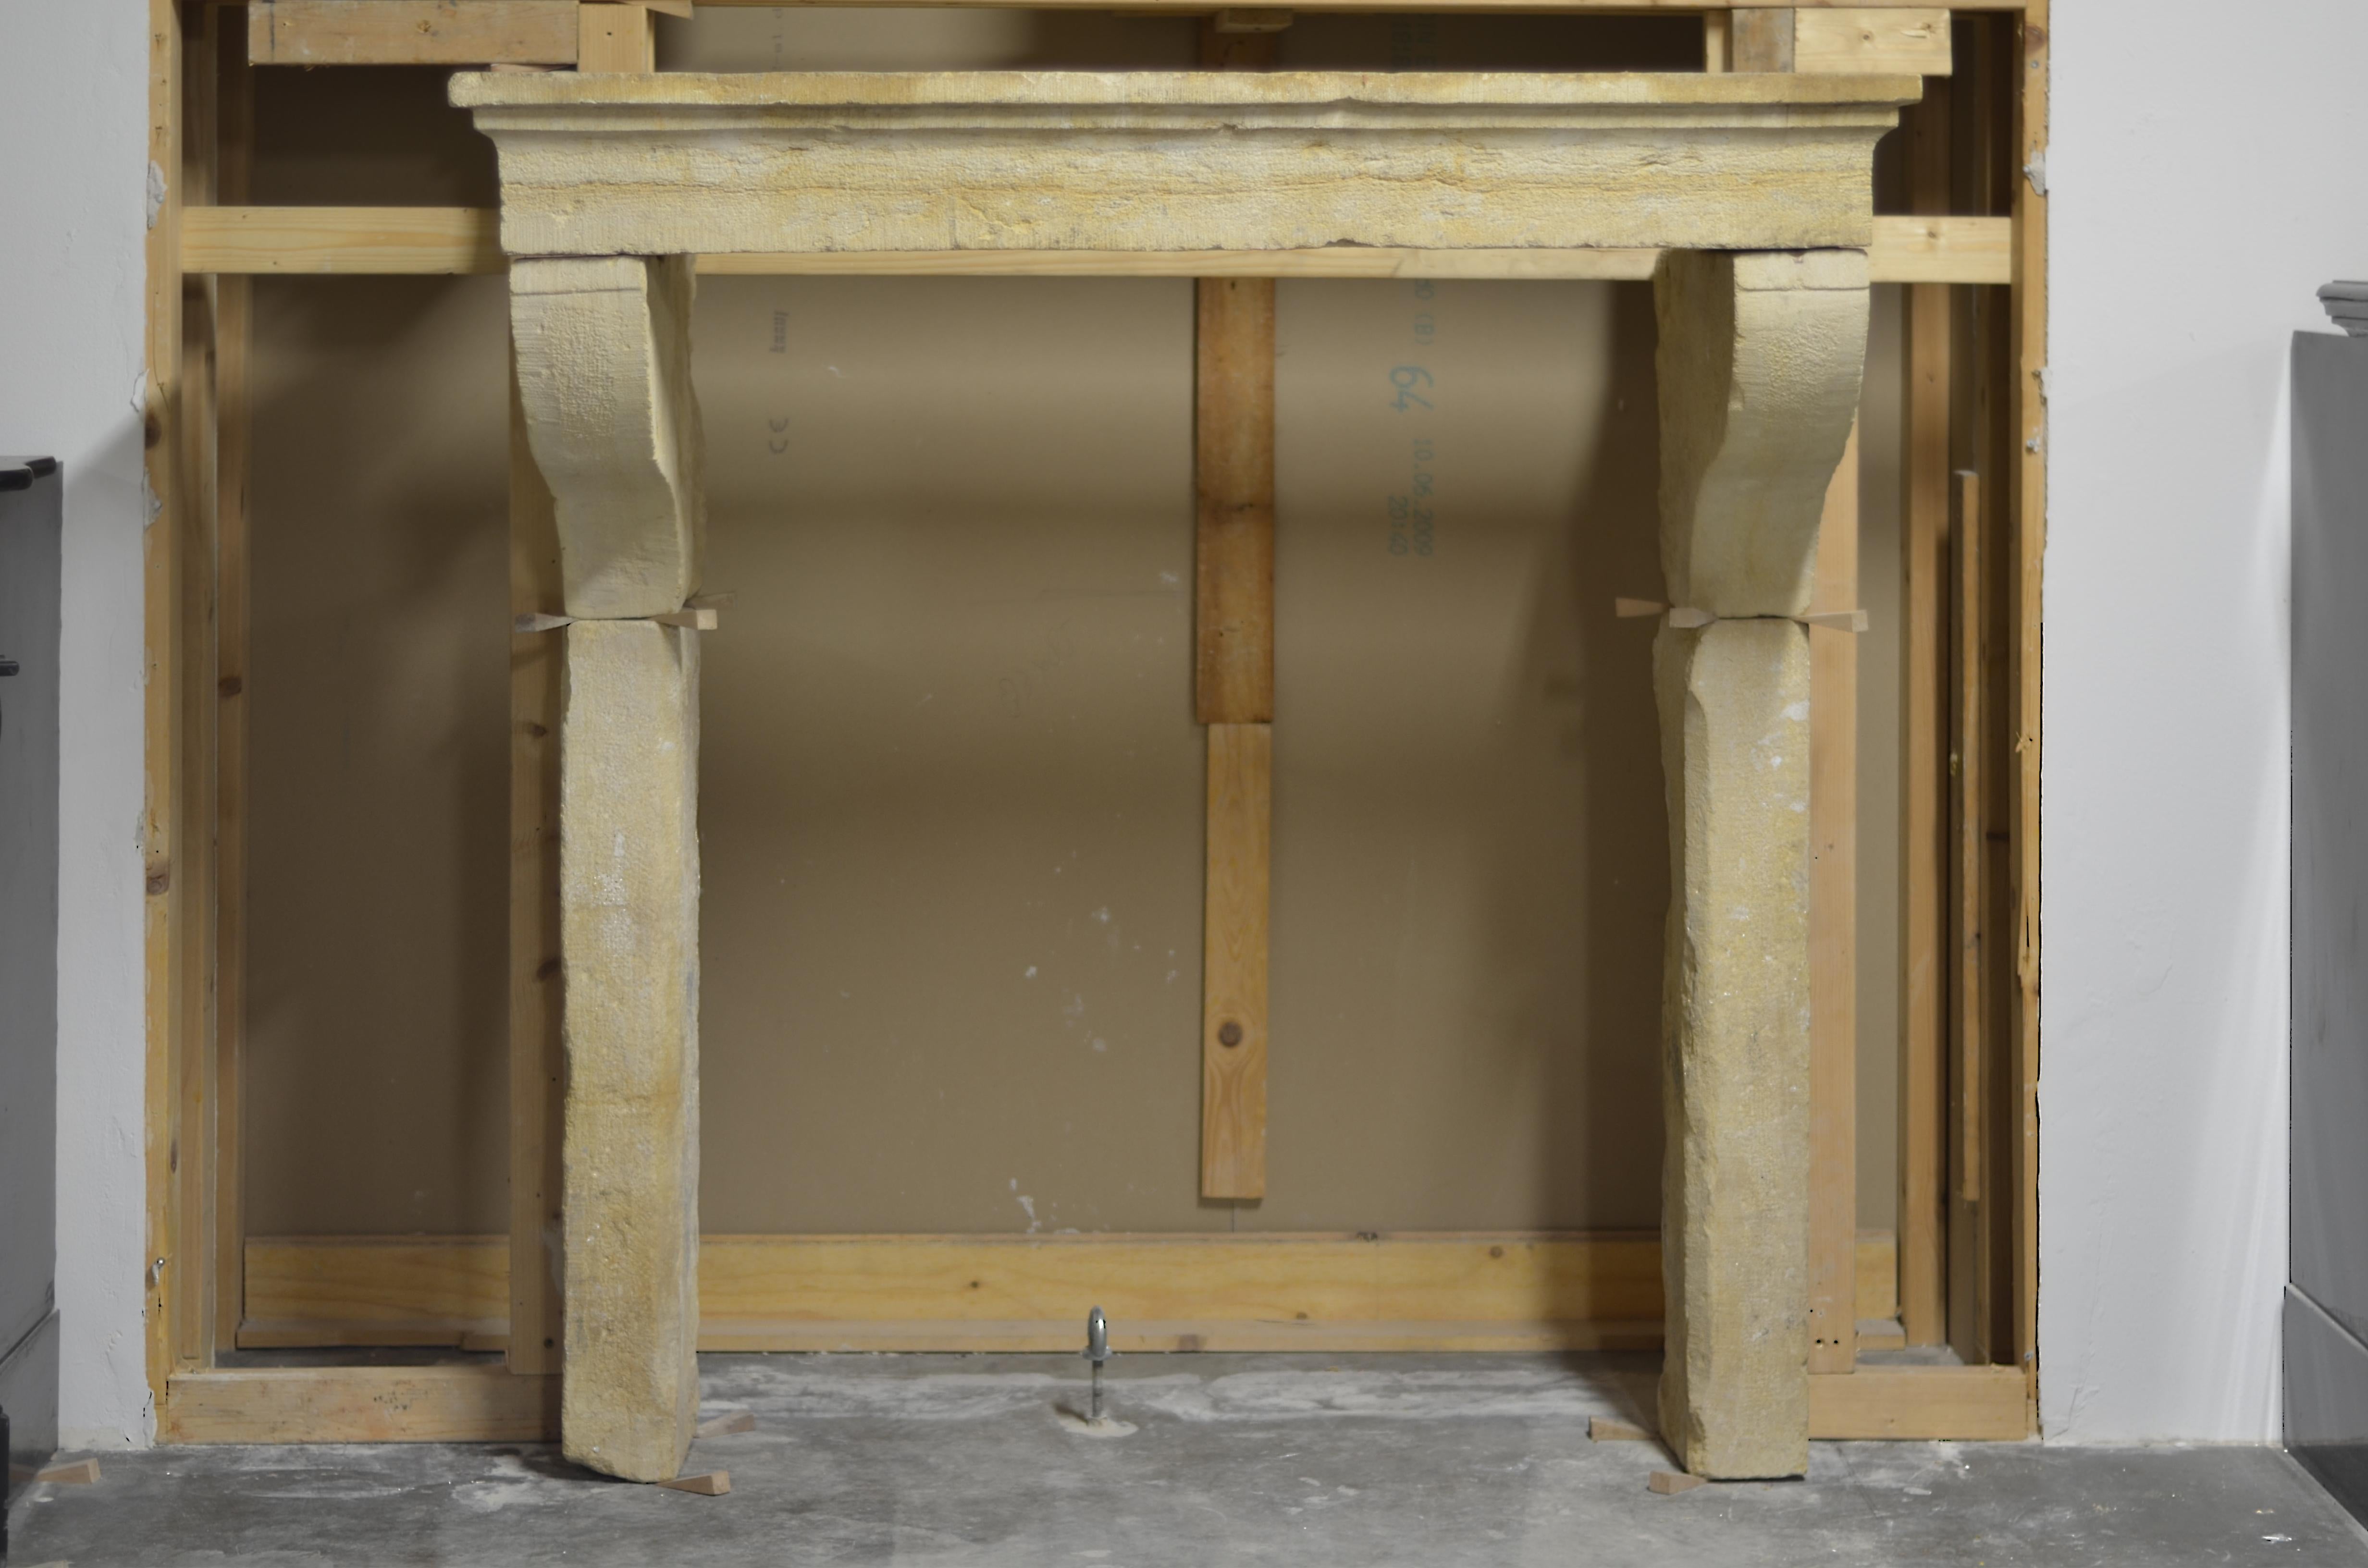 Nice and tall robust French country fireplace mantel in Burgundy limestone.
It’s nice proportions make is very suitable for an outdoor fireplace or large living areas. It simple lines and style make it very accessible and great to use in any kind